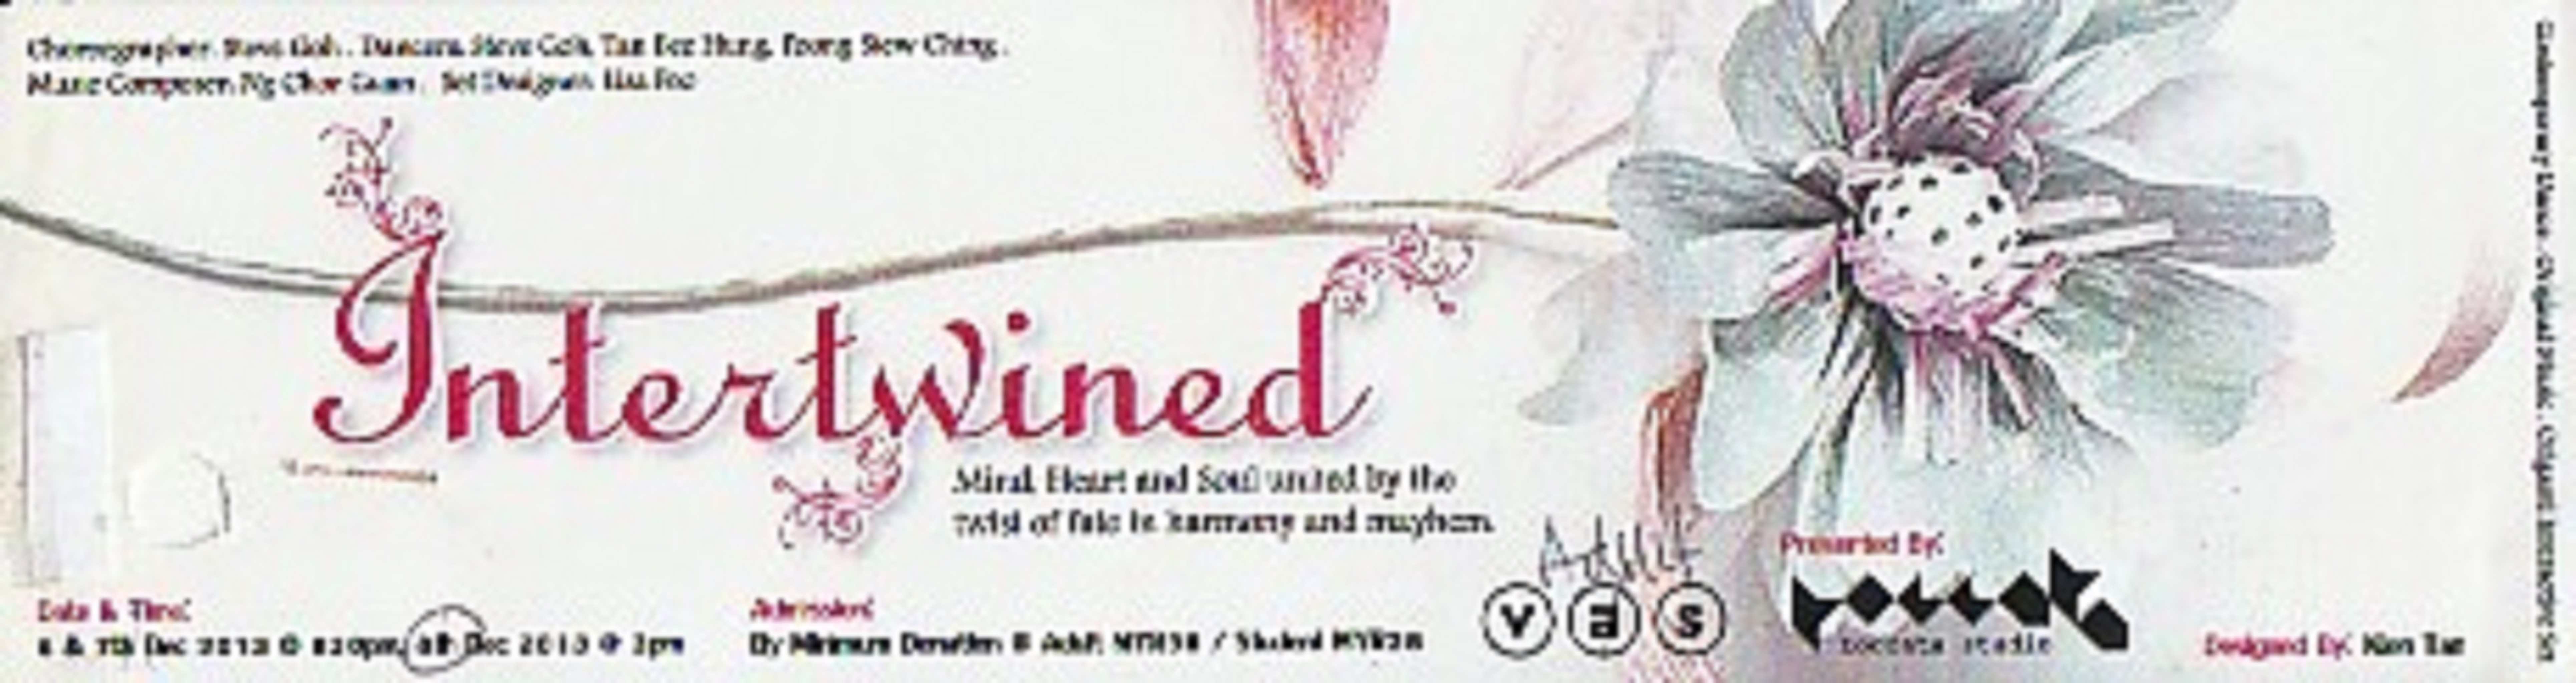 2013 Intertwined Cover